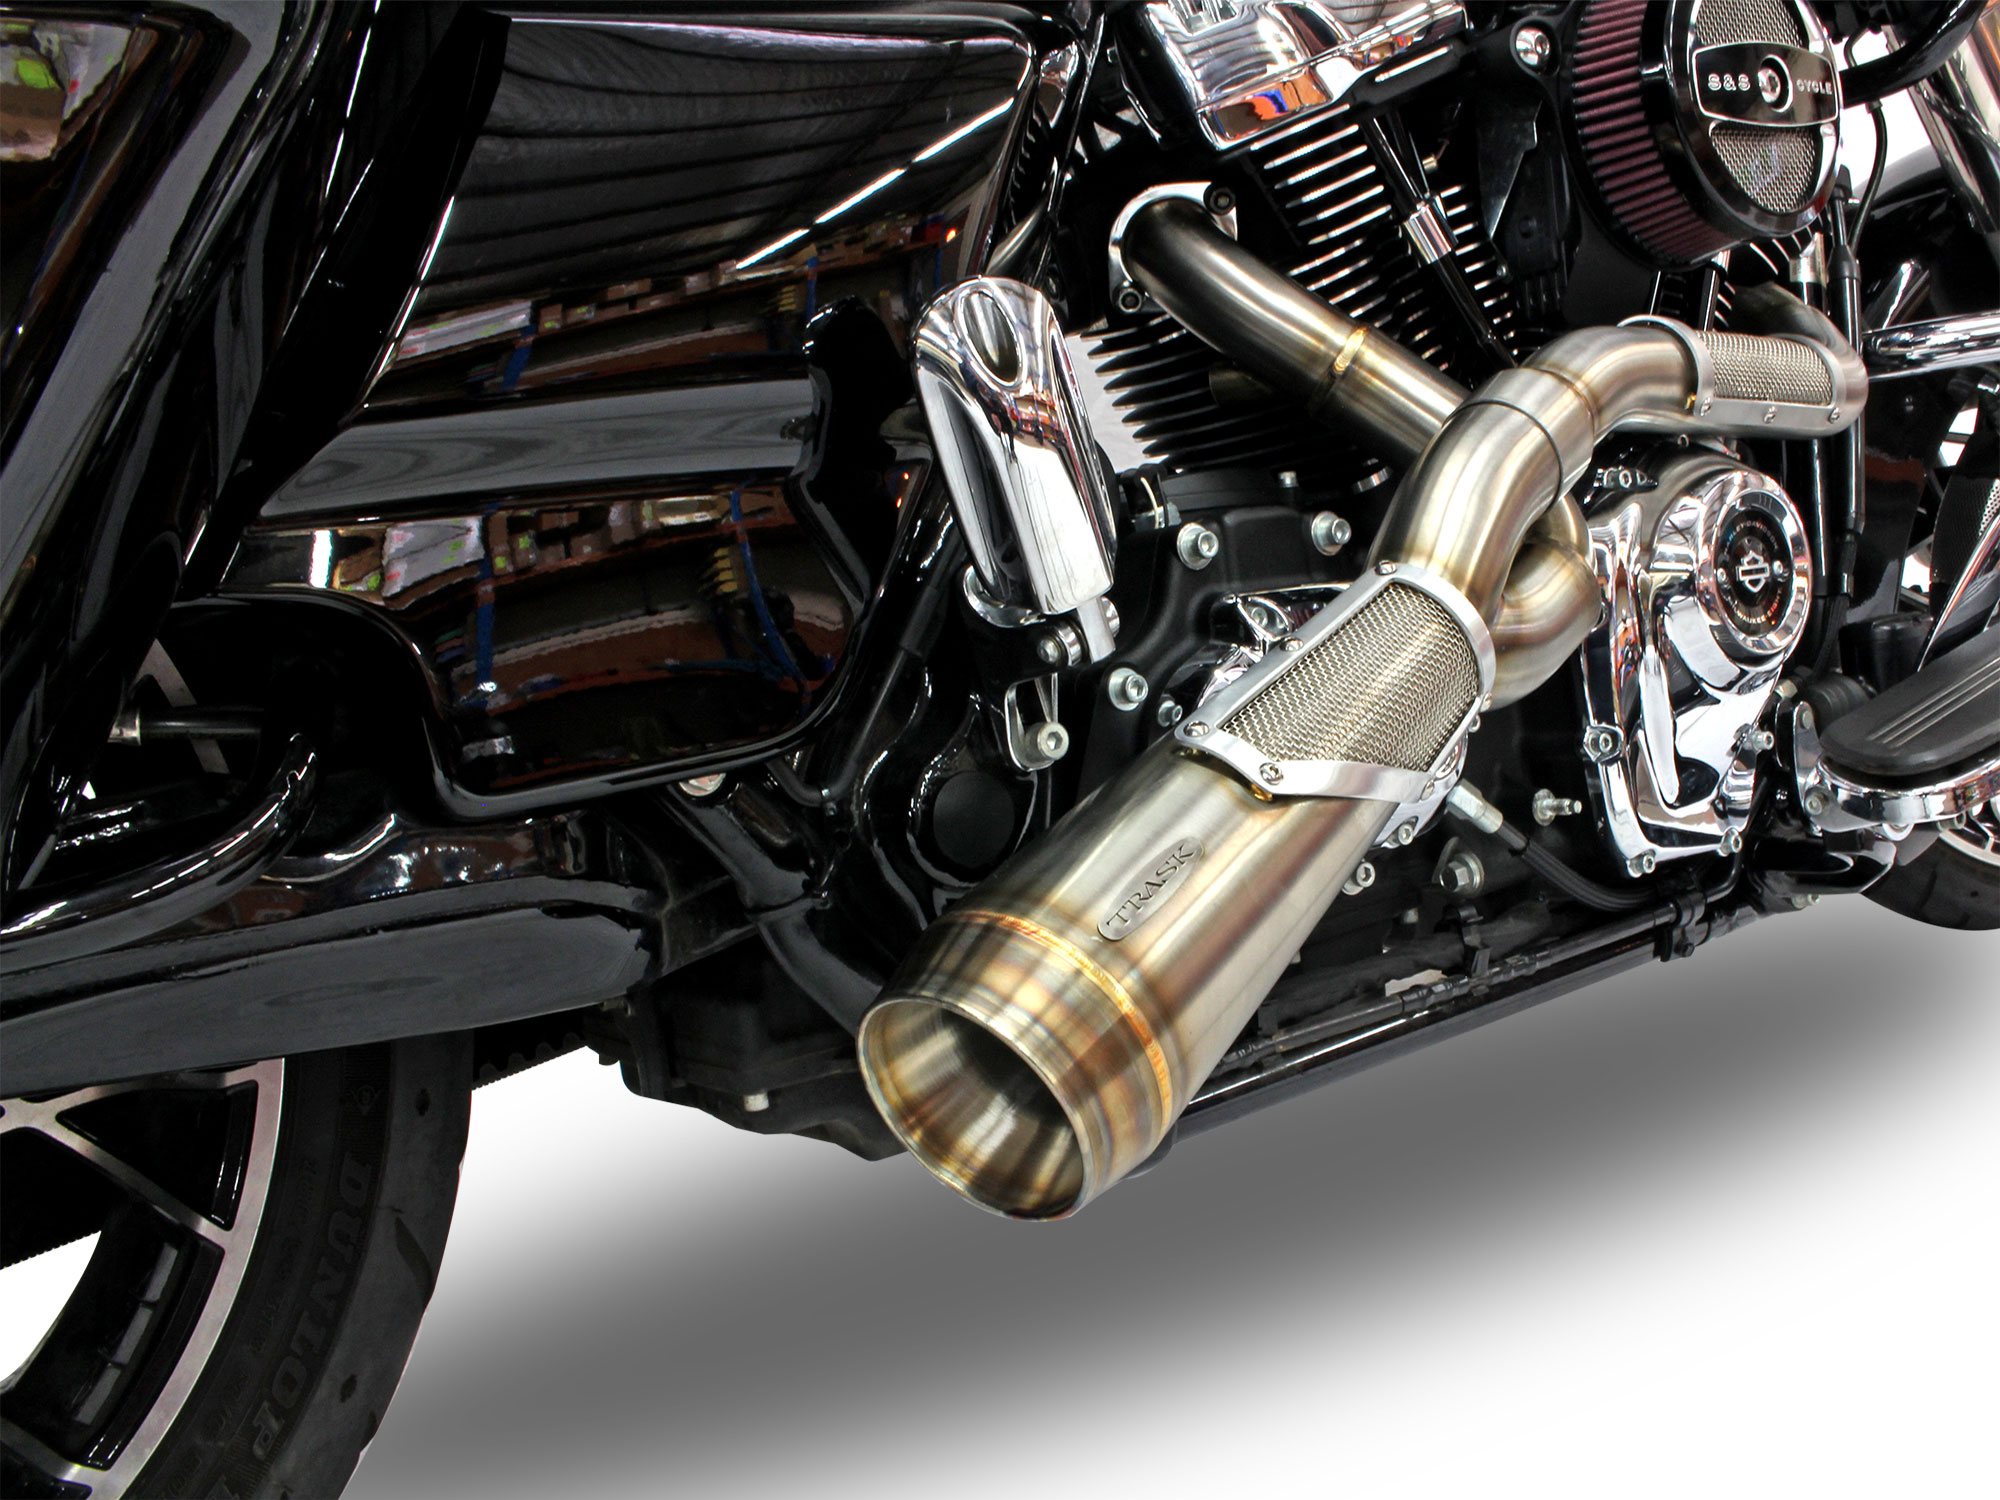 Big Sexy Performance 2-into-1 Exhaust - Stainless Steel. Fits Touring 2017up.